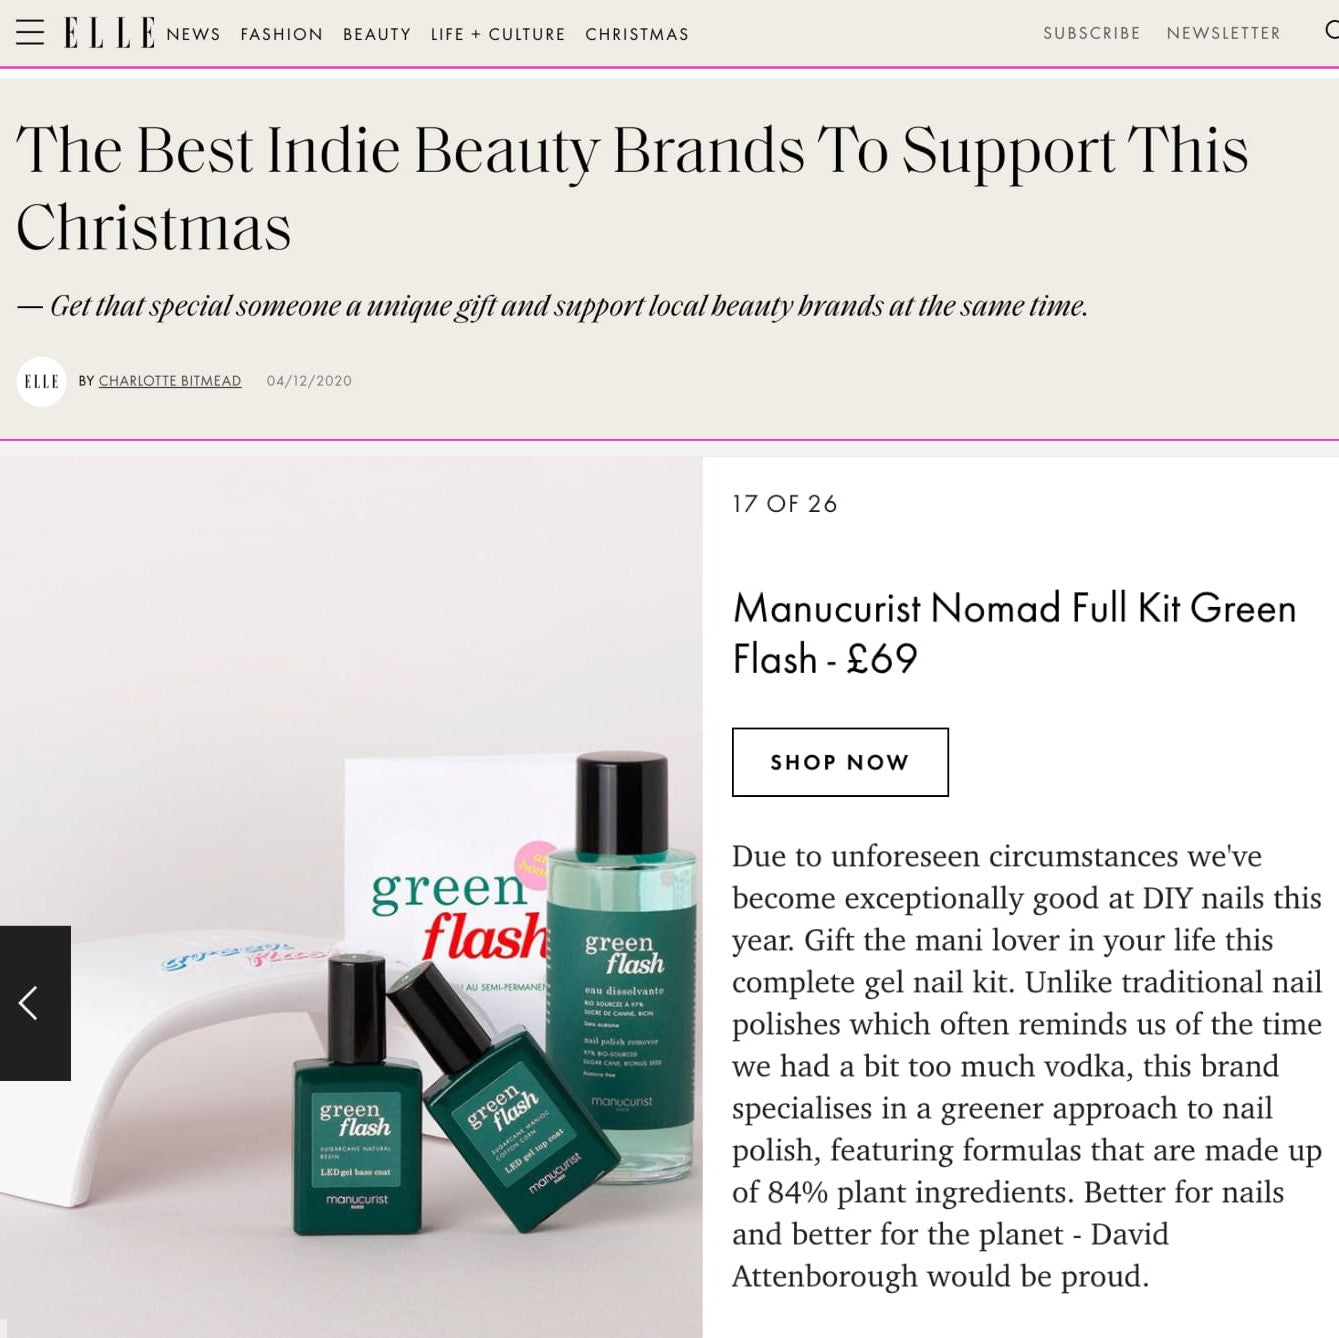 The Best Indie Beauty Brands To Support This Christmas